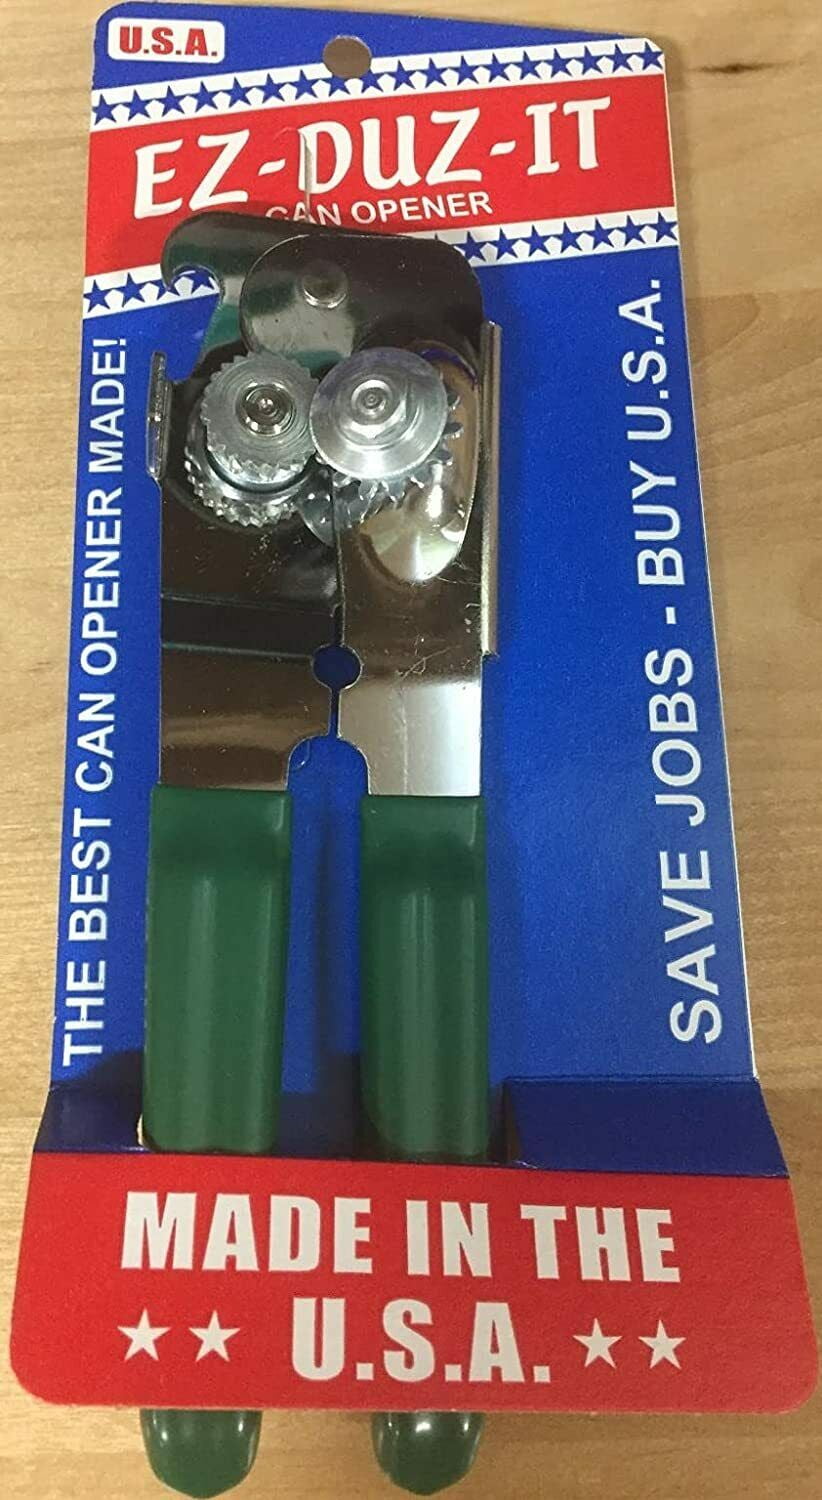 EZ DUZ IT Made in the USA Manual CAN OPENER w/ Green Grips AMERICAN Made